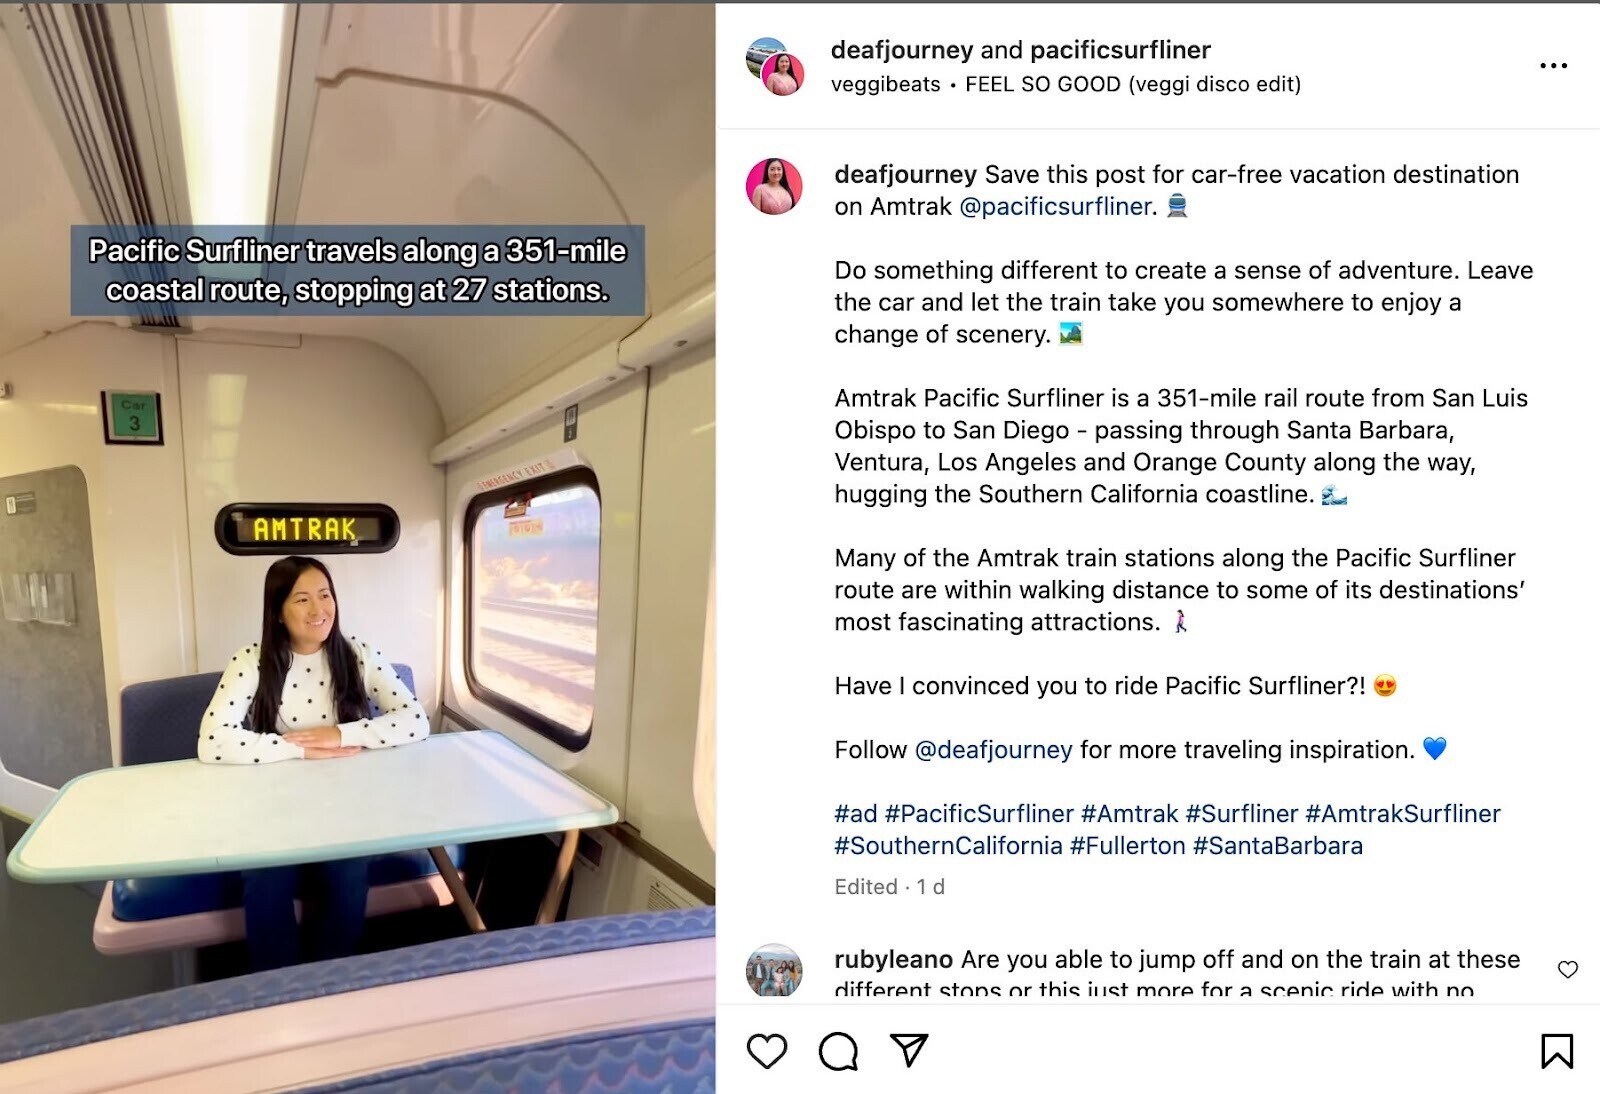 Instagram post by Amtrak featuring an influencer